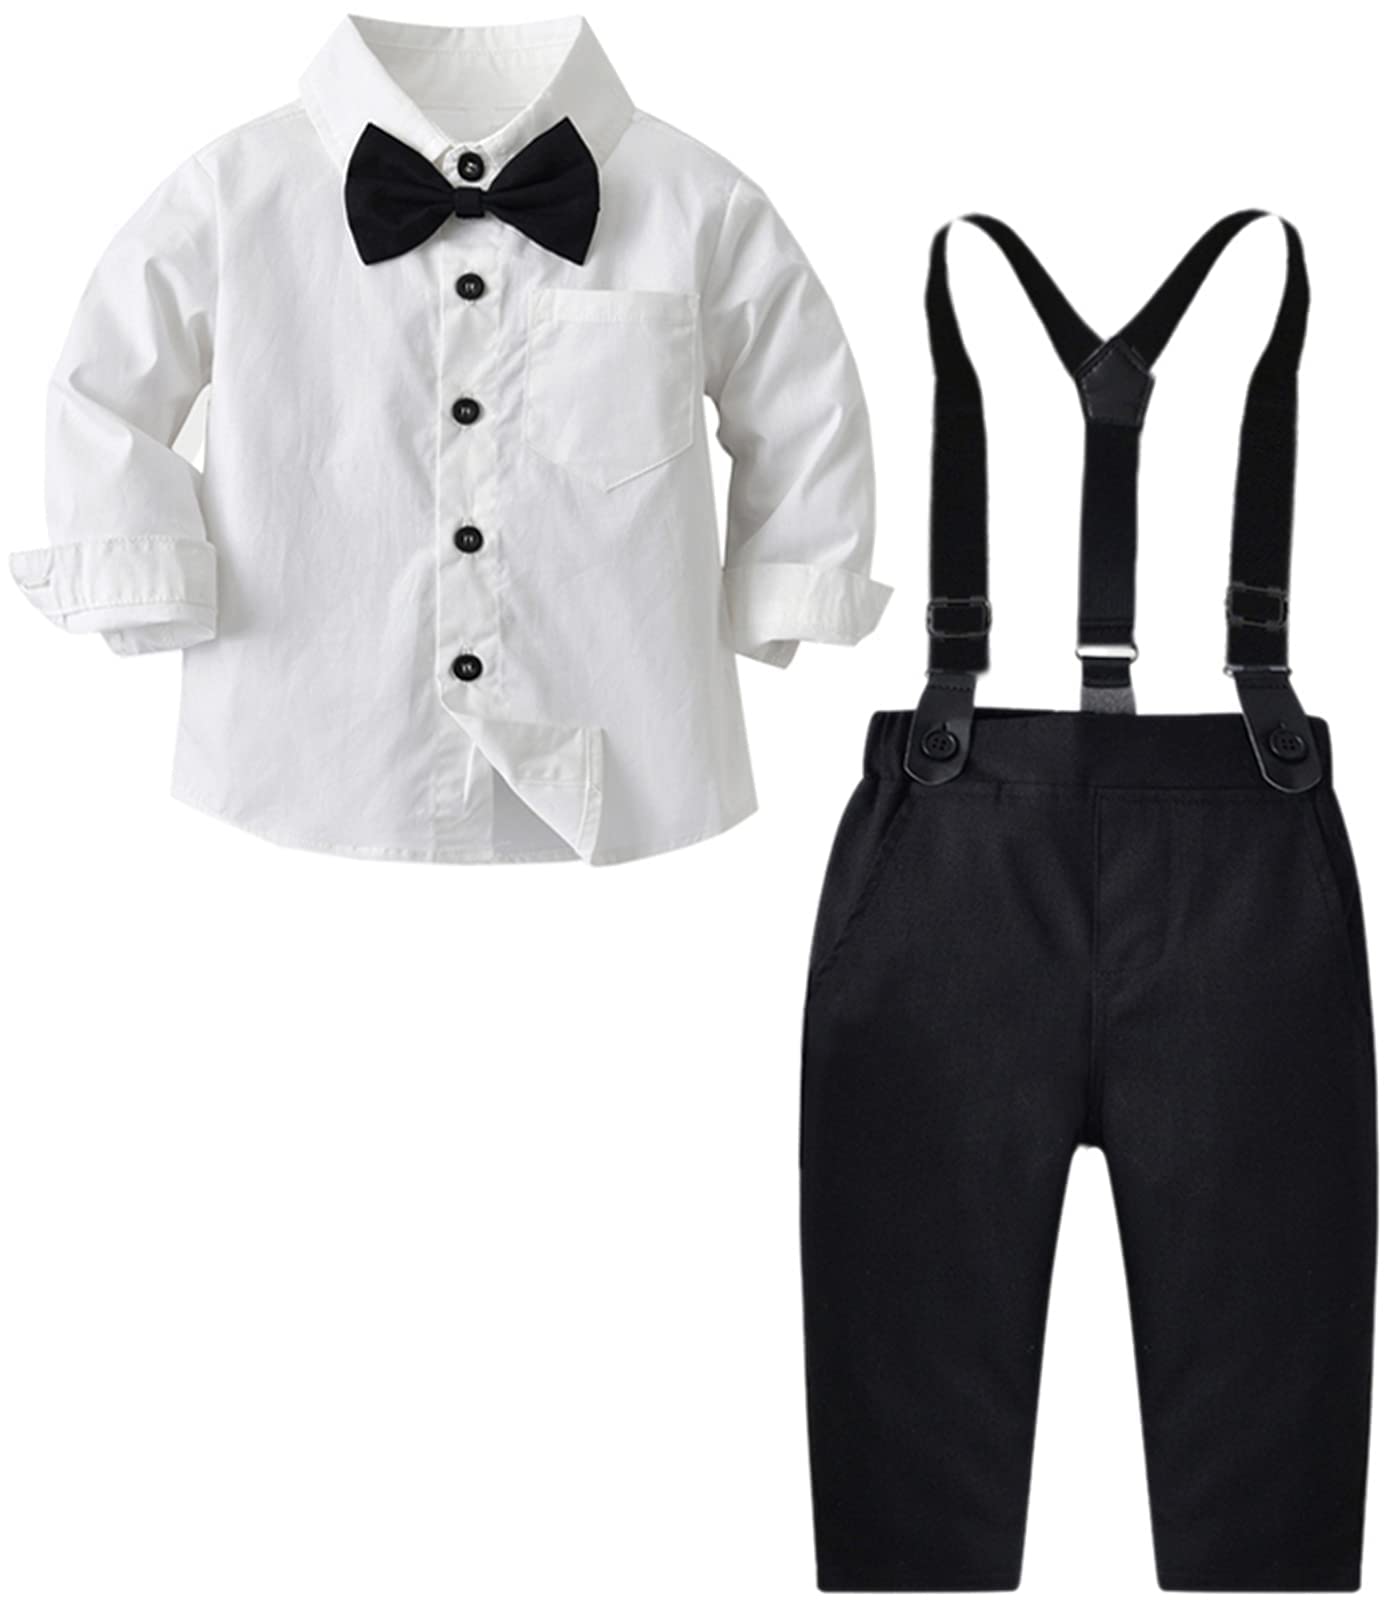 SANGTREE Boys Dress Clothes Set, 2Pcs Clothing Set For Boys Of Classic Formal Shirt With Bowtie  Suspender Pants, White 2, Tag 180  10-11